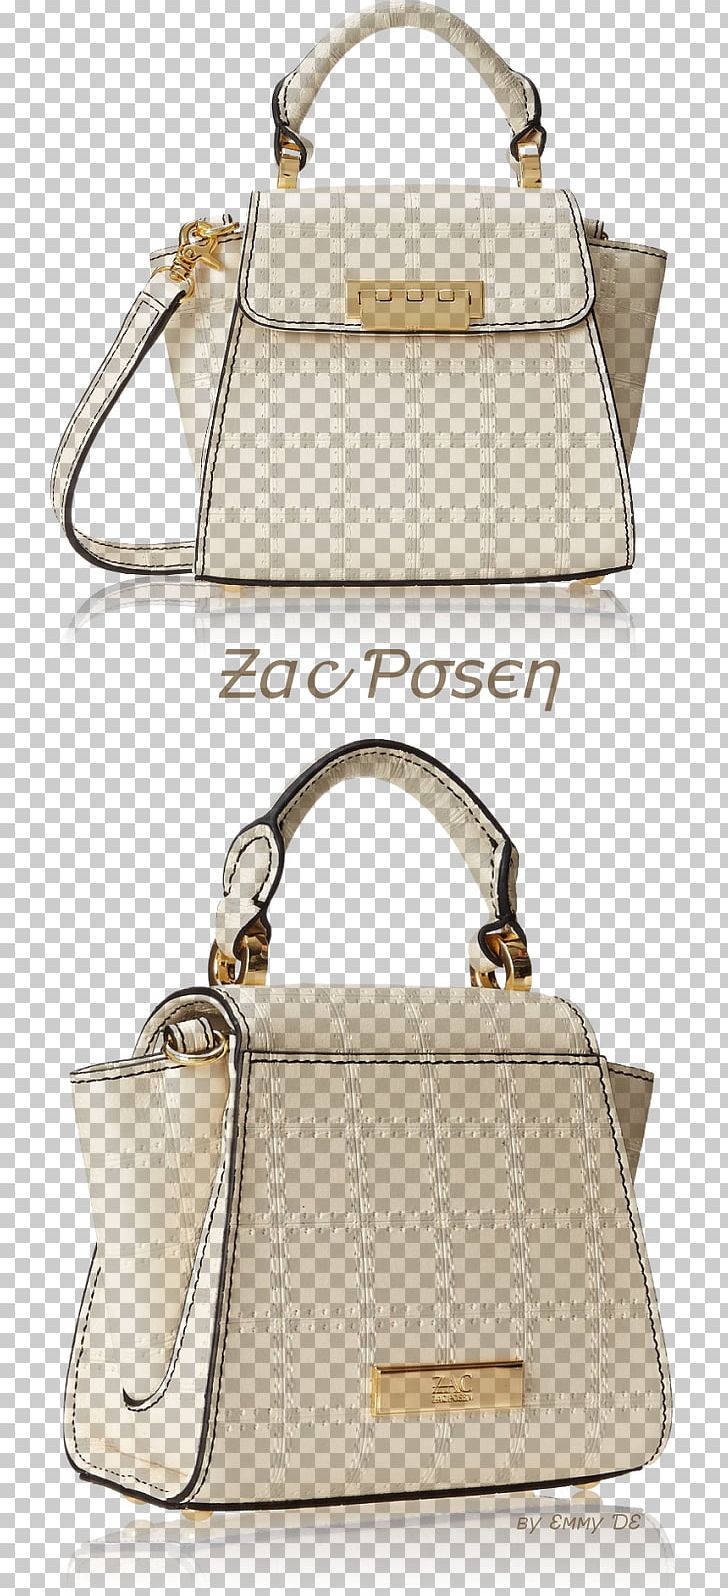 Handbag Leather Messenger Bags Strap PNG, Clipart, Accessories, Bag, Beige, Brand, Fashion Accessory Free PNG Download